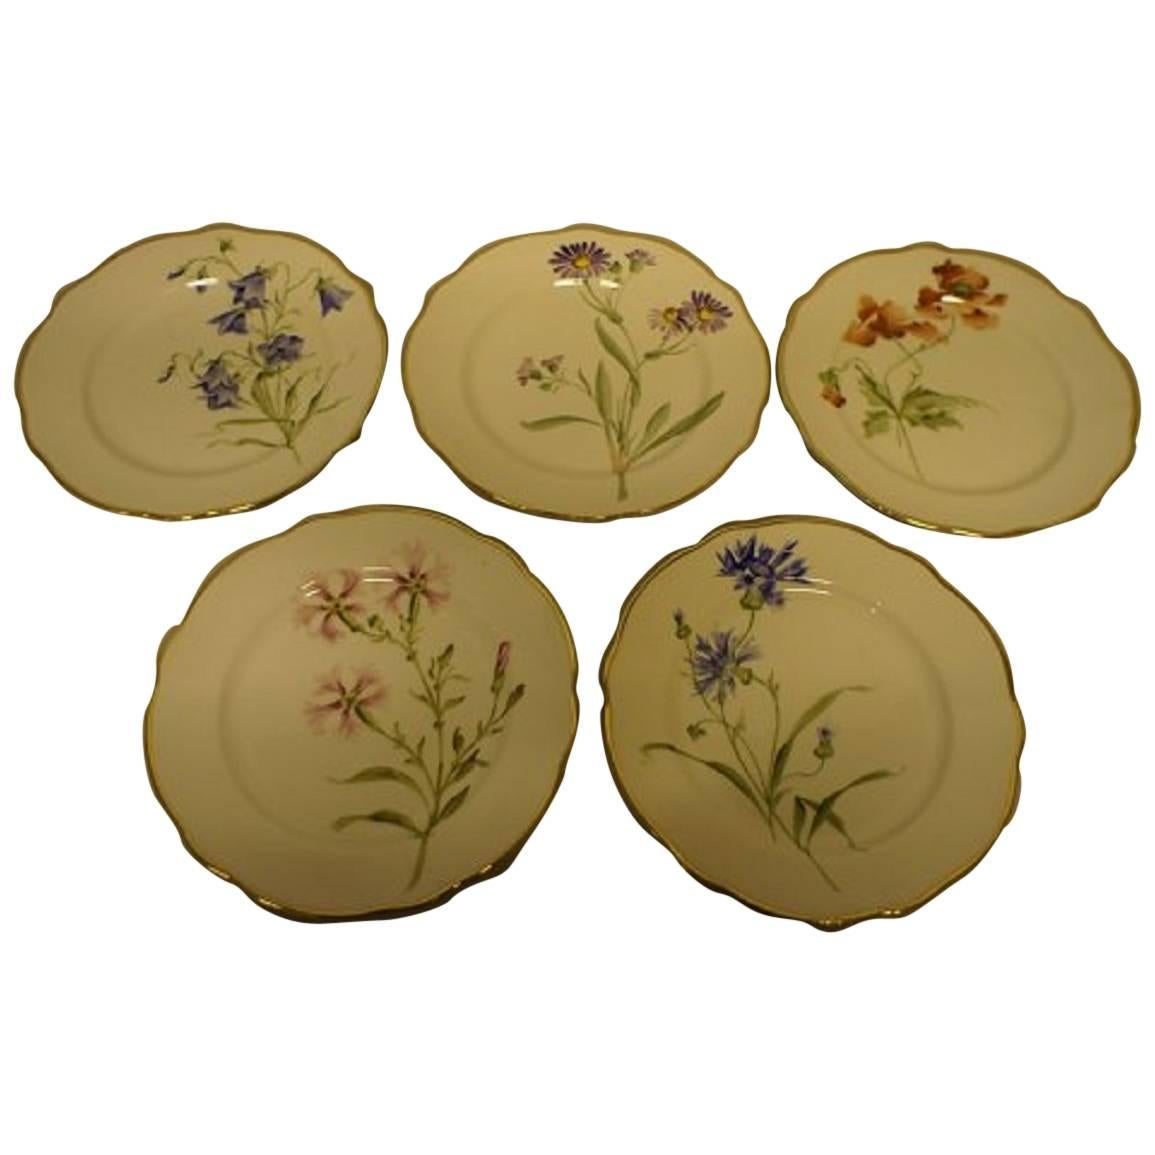 11 Rörstrand Art Nouveau Plates, Hand-Painted, Different Flowers